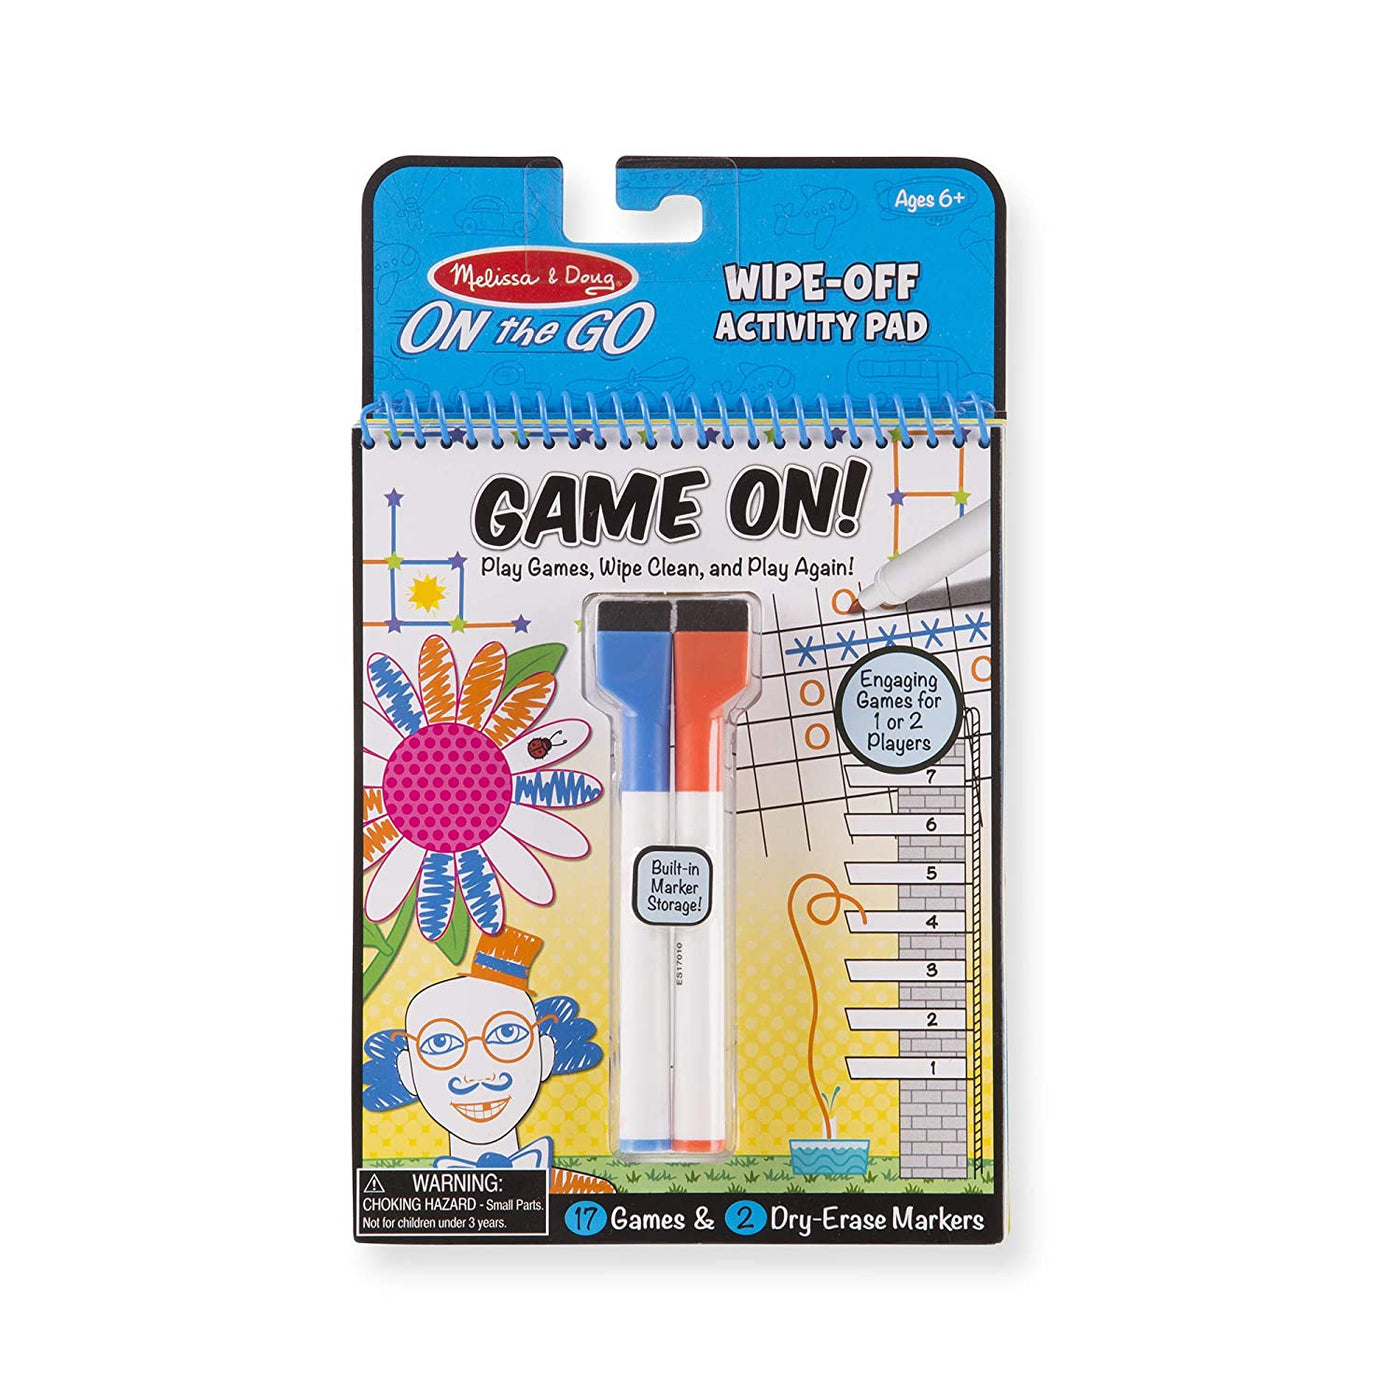 On The Go Spy Game! Wipe-Off Activity Pad